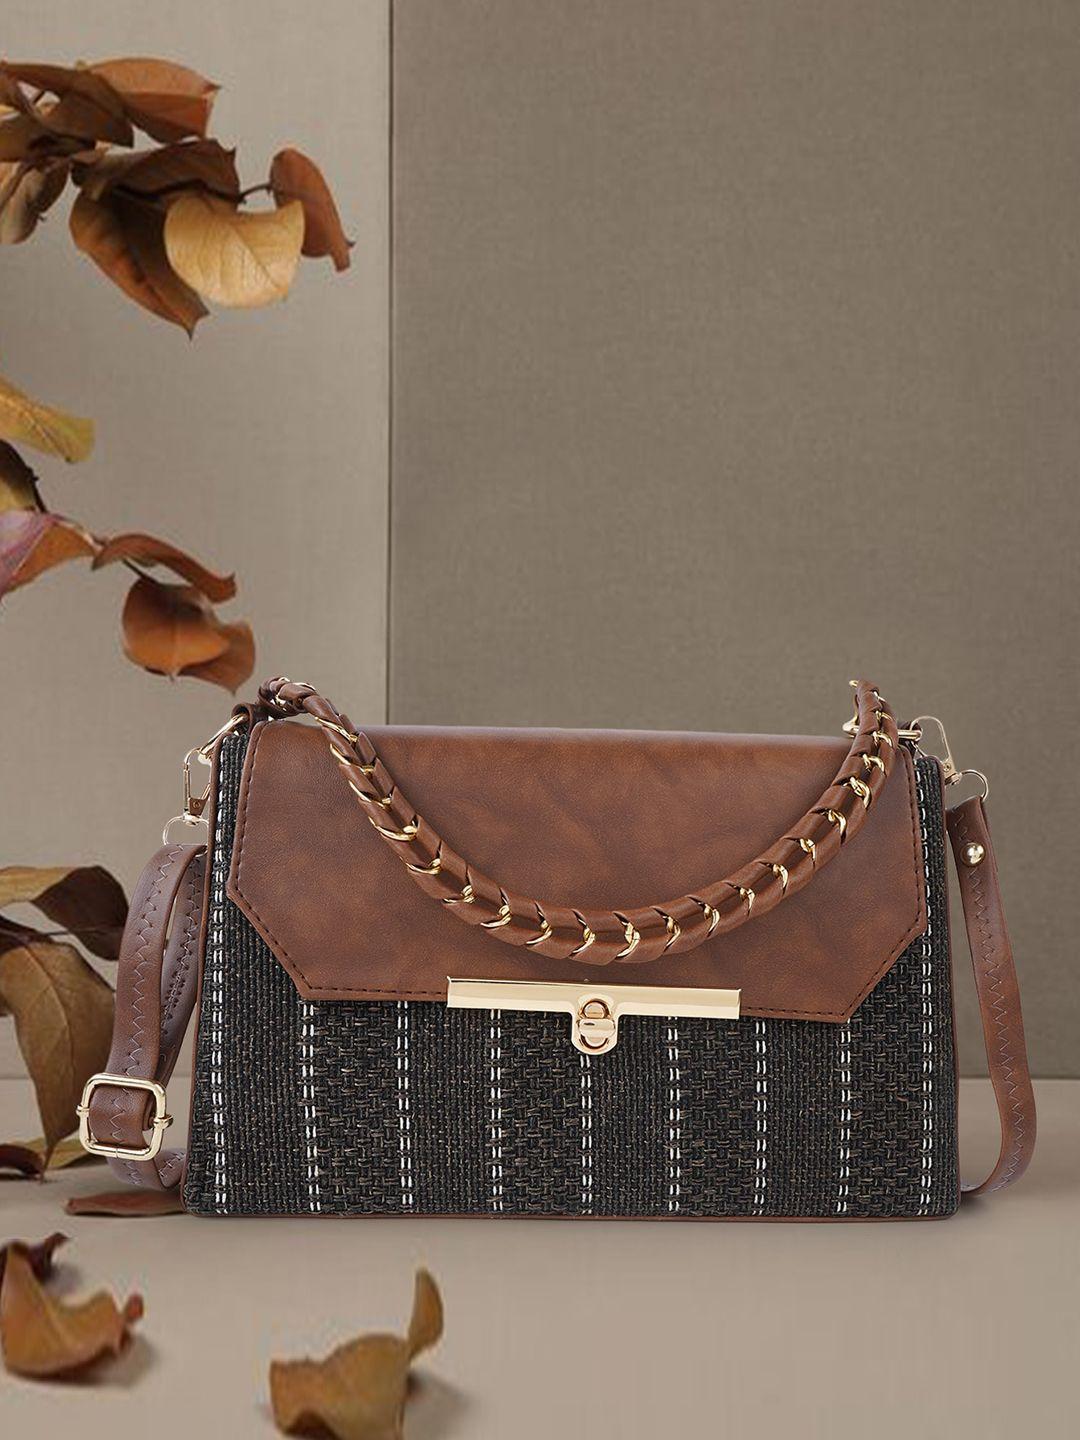 mast & harbour brown textured structured sling bag with buckle detail